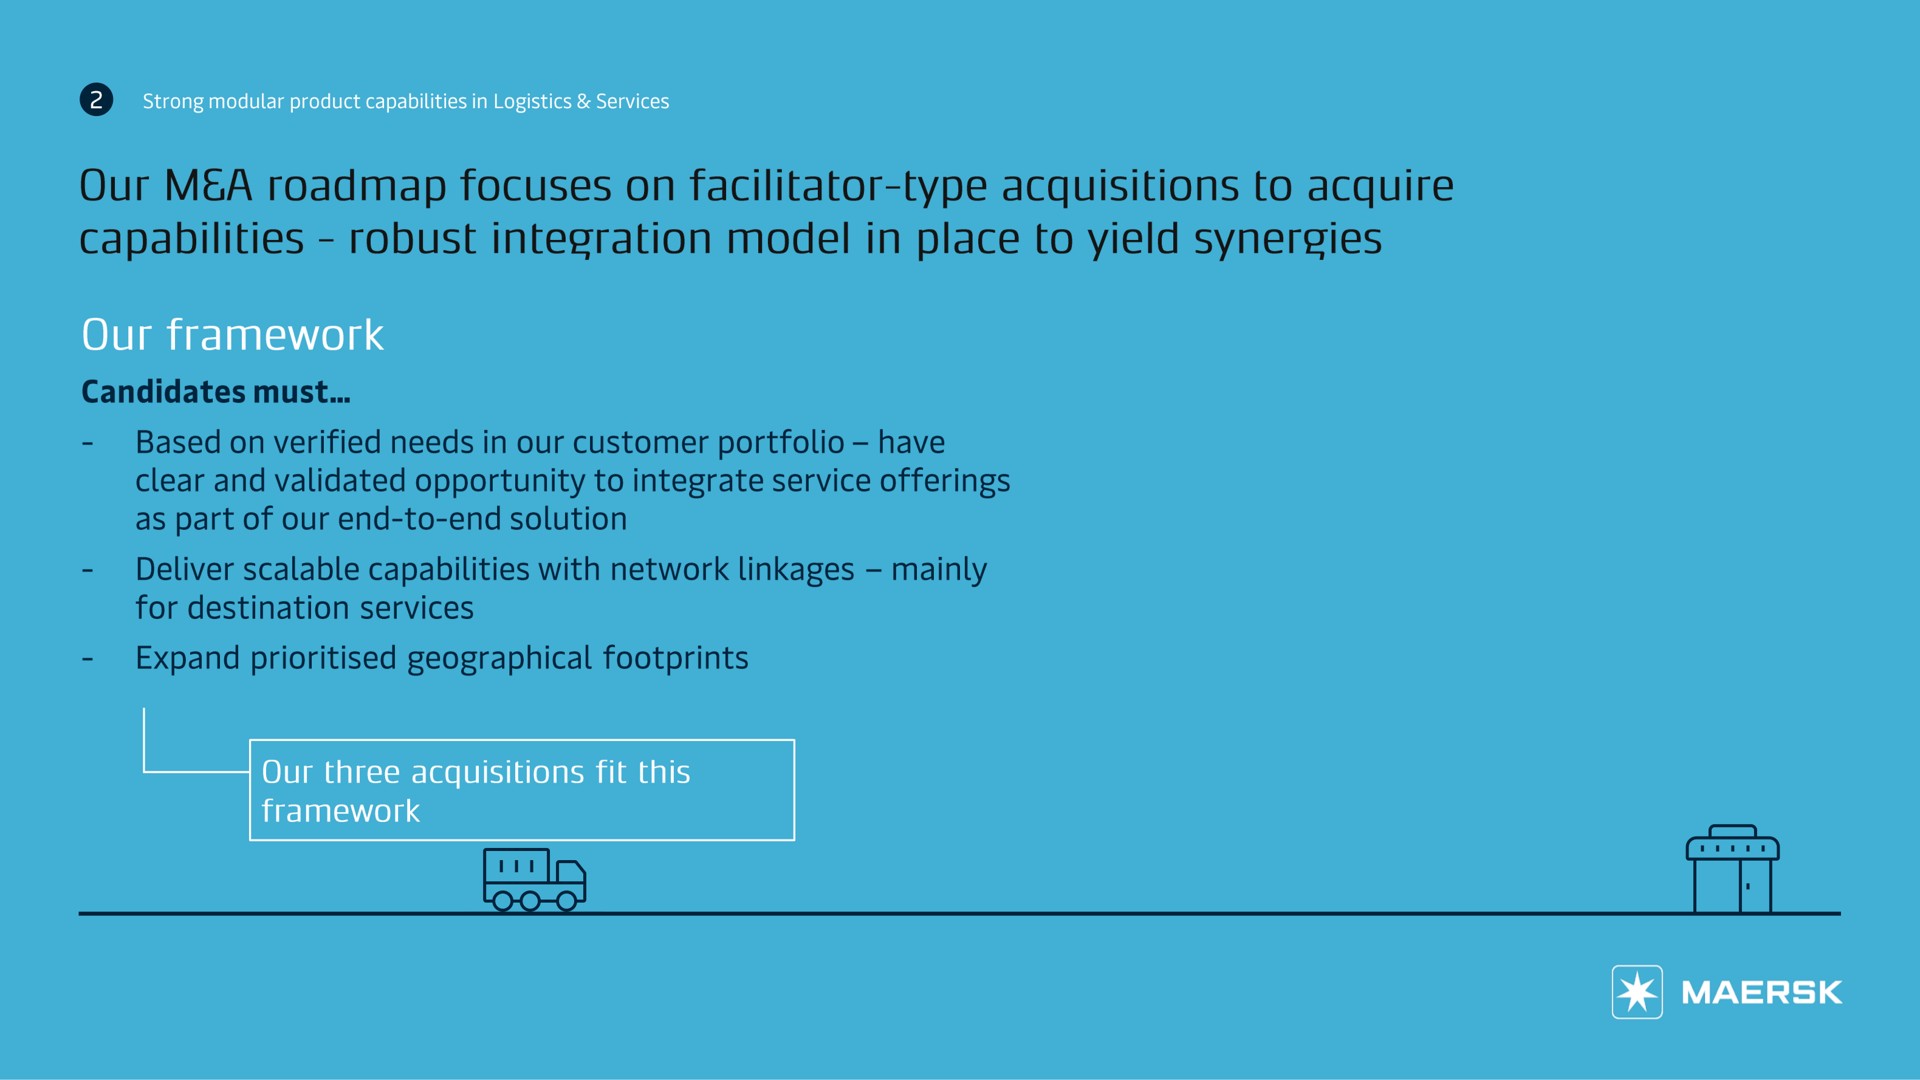 our a focuses on facilitator type acquisitions to acquire capabilities robust integration model in place to yield synergies | Maersk